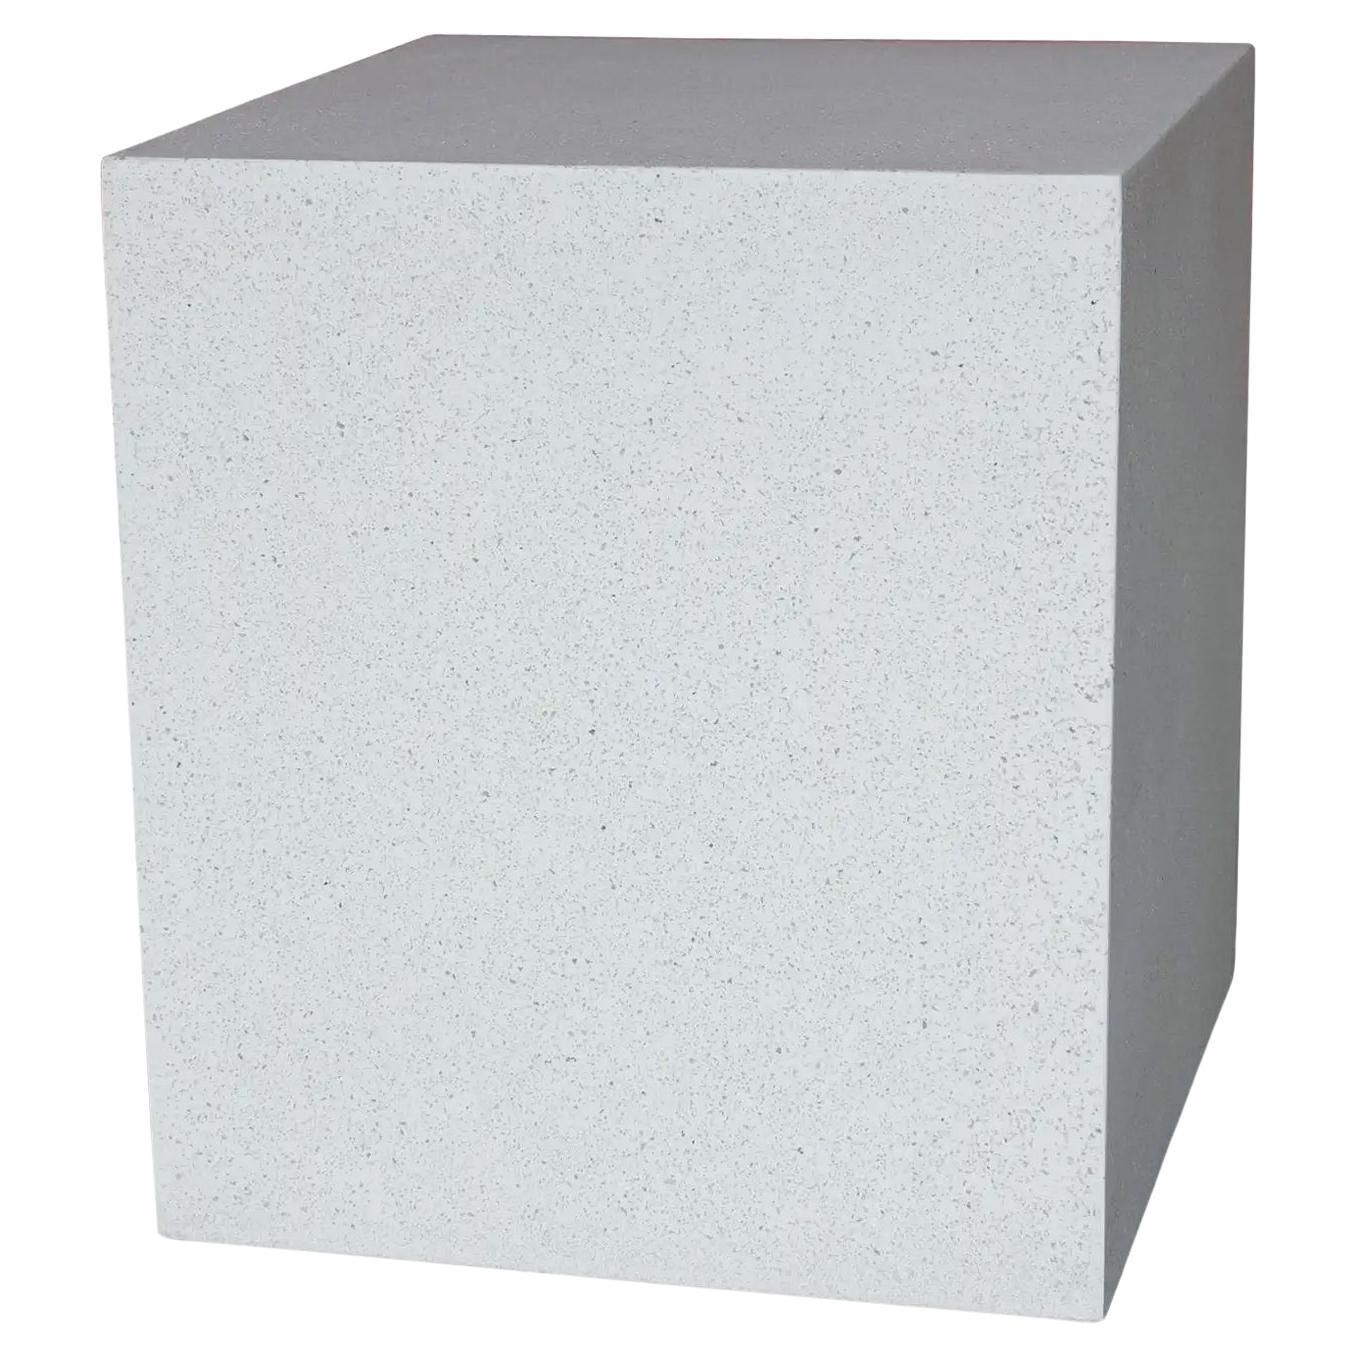 Cast Resin 'Square' Side Table, White Stone Finish by Zachary A. Design For Sale